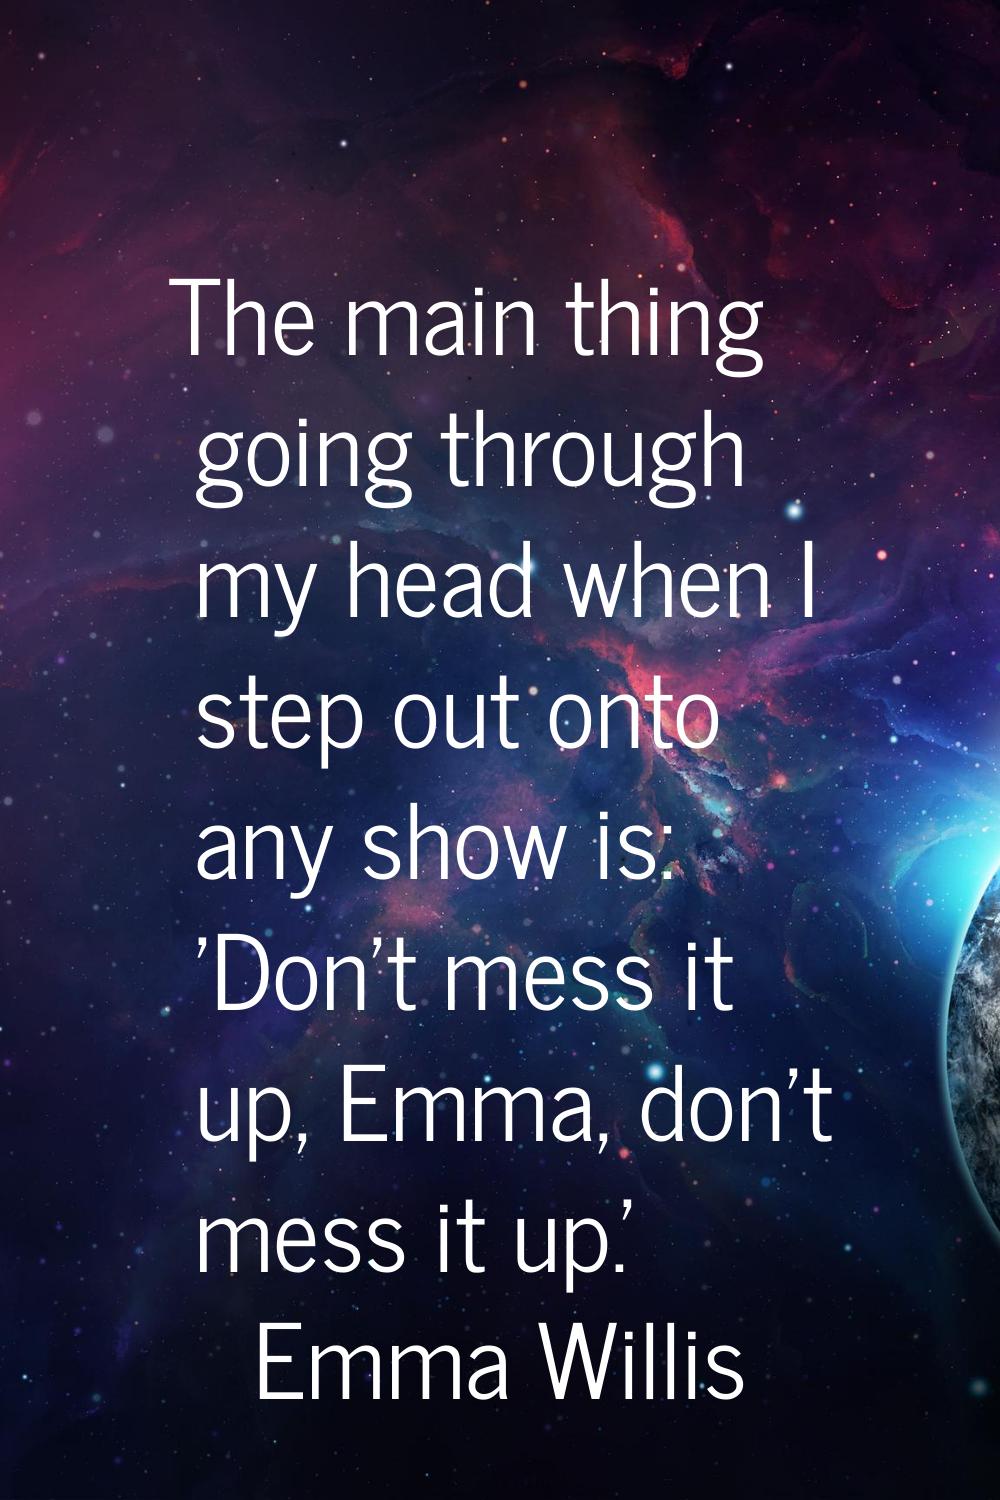 The main thing going through my head when I step out onto any show is: 'Don't mess it up, Emma, don